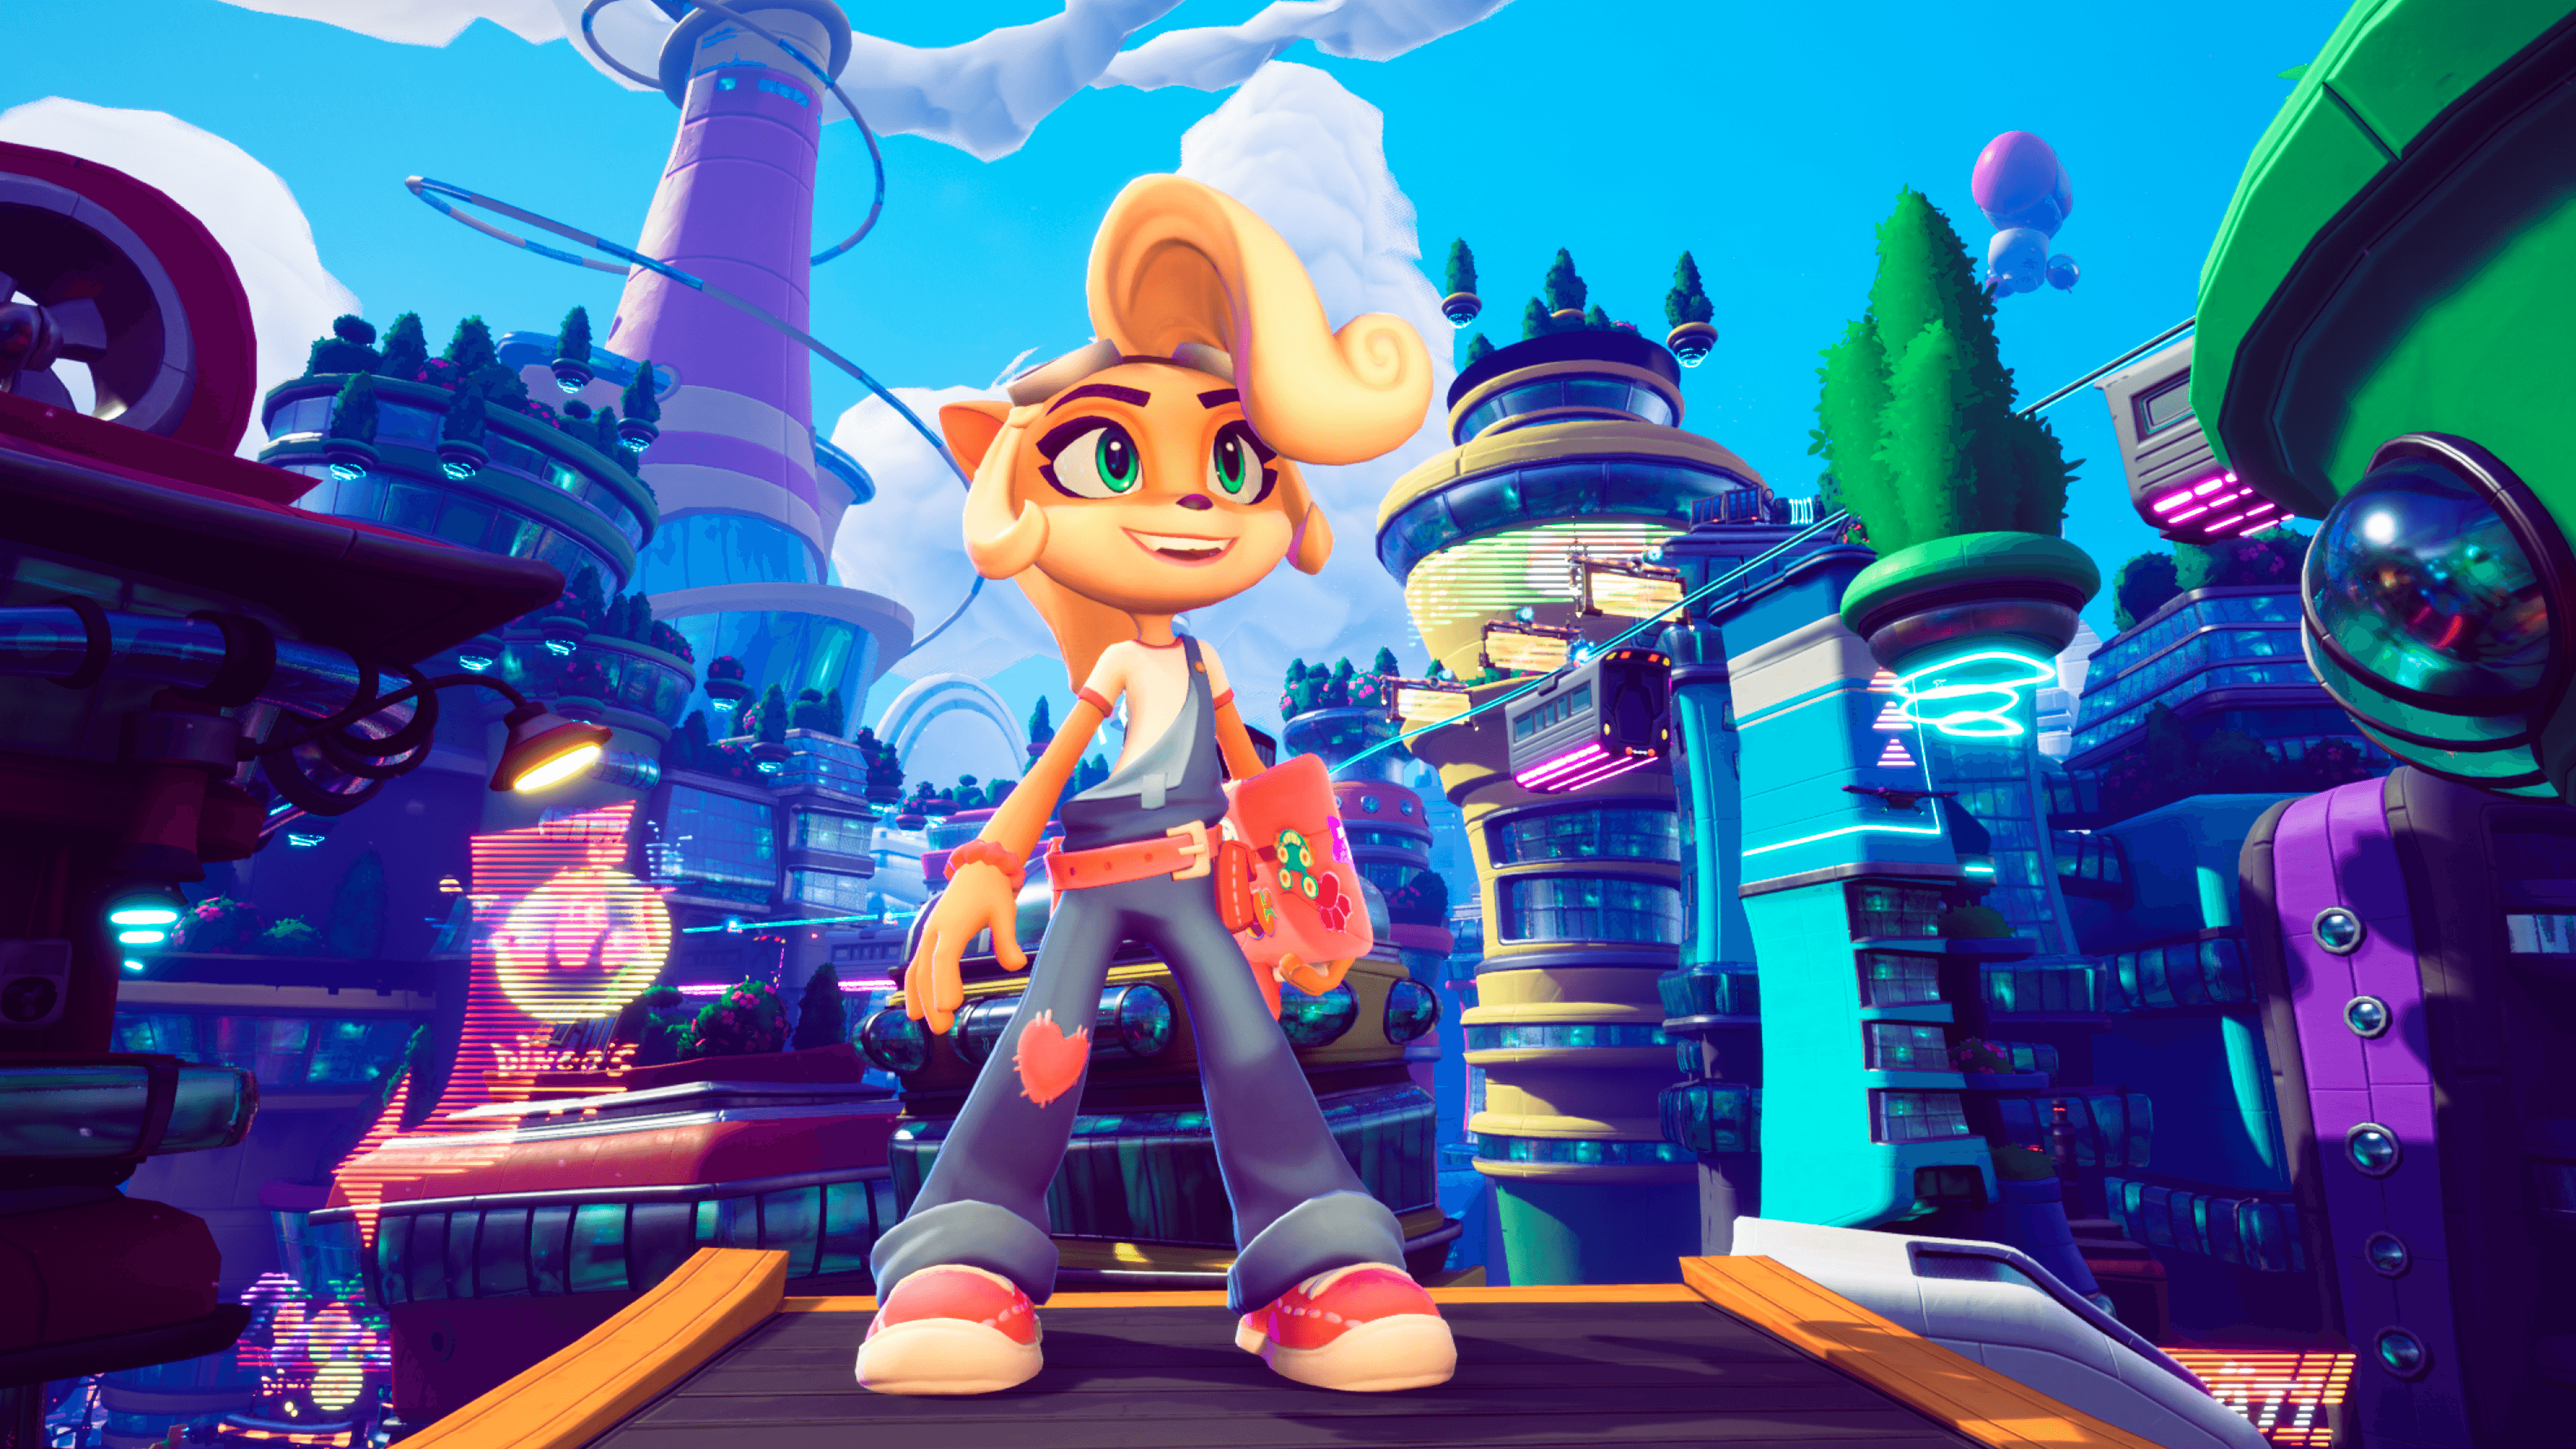 Coco Bandicoot Crash Bandicoot Crash Bandicoot 4 It S About Time 3840x2160